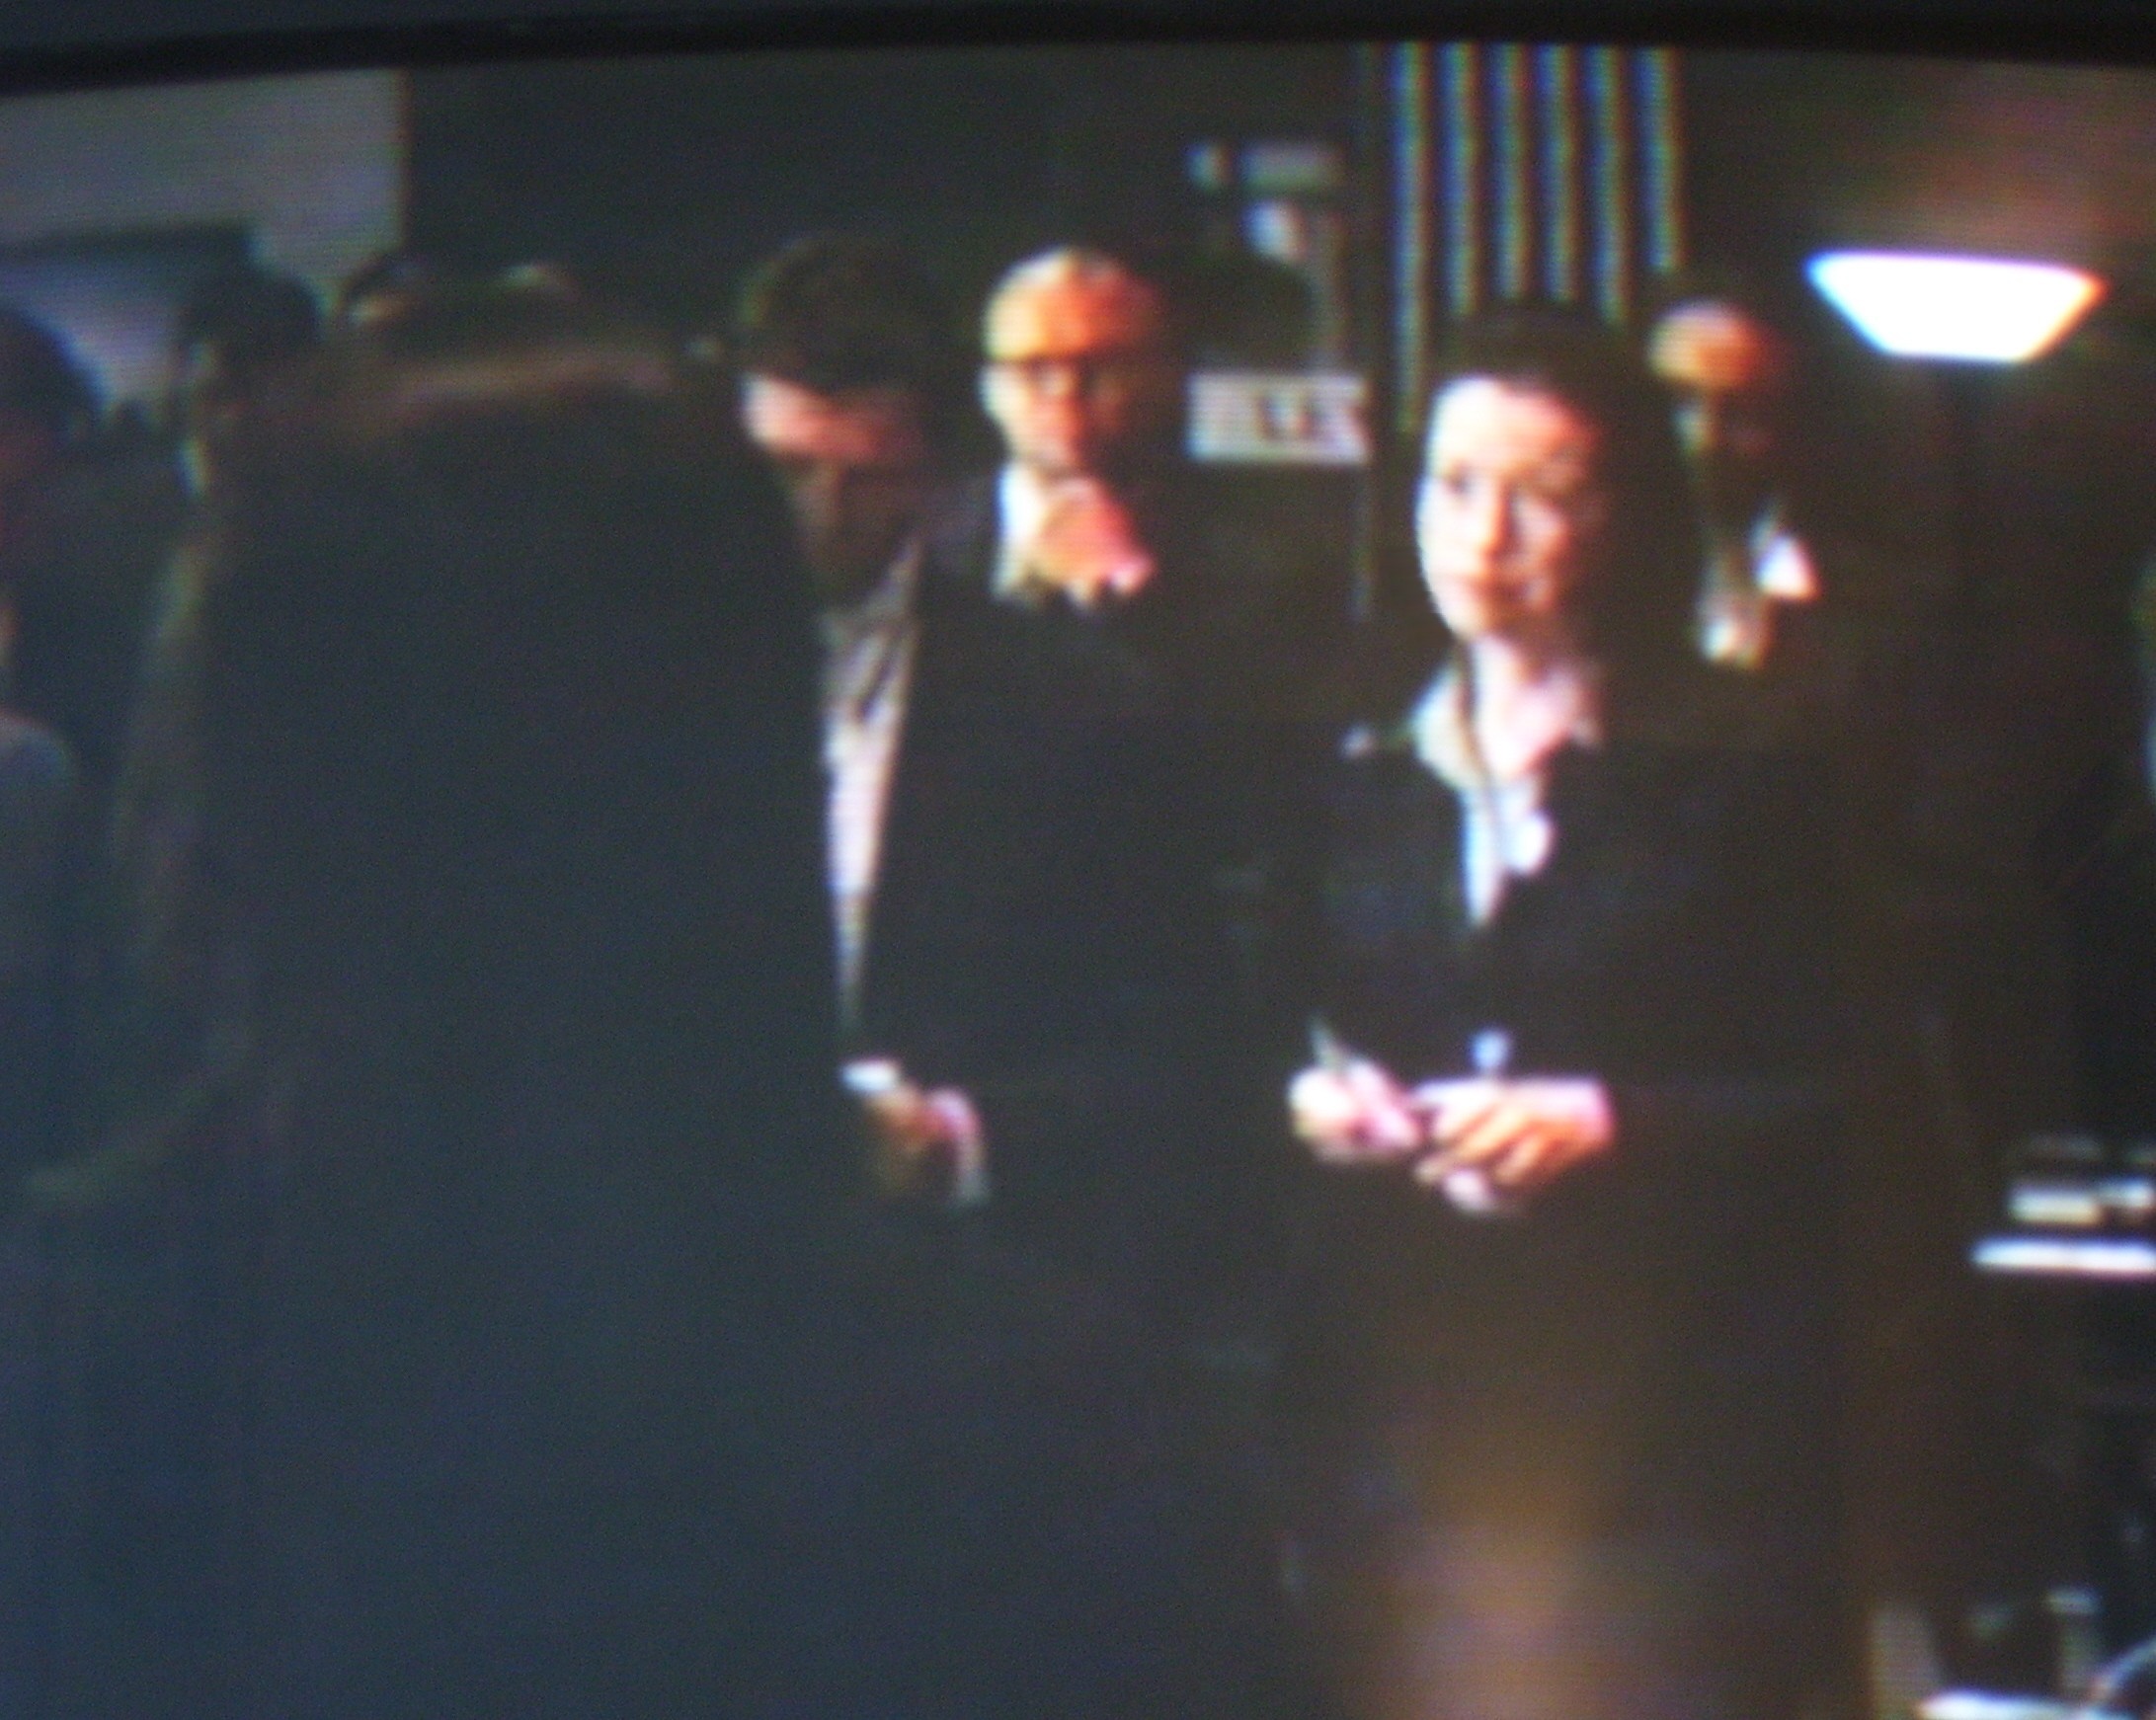 Criminal Minds, CBS, January 18, 2012, Erin Pickett at right, playing an FBI Agent.